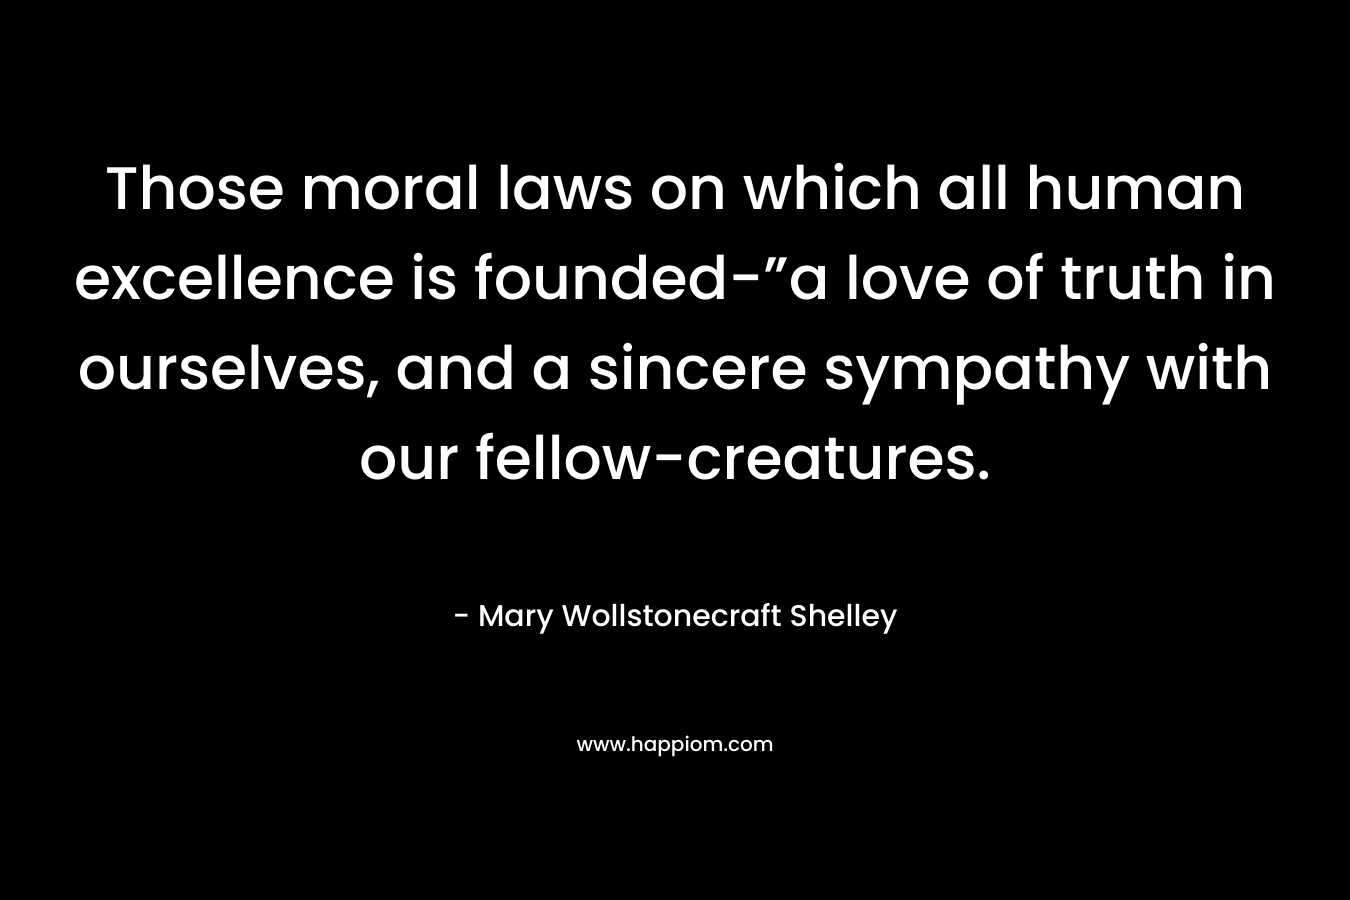 Those moral laws on which all human excellence is founded-”a love of truth in ourselves, and a sincere sympathy with our fellow-creatures.